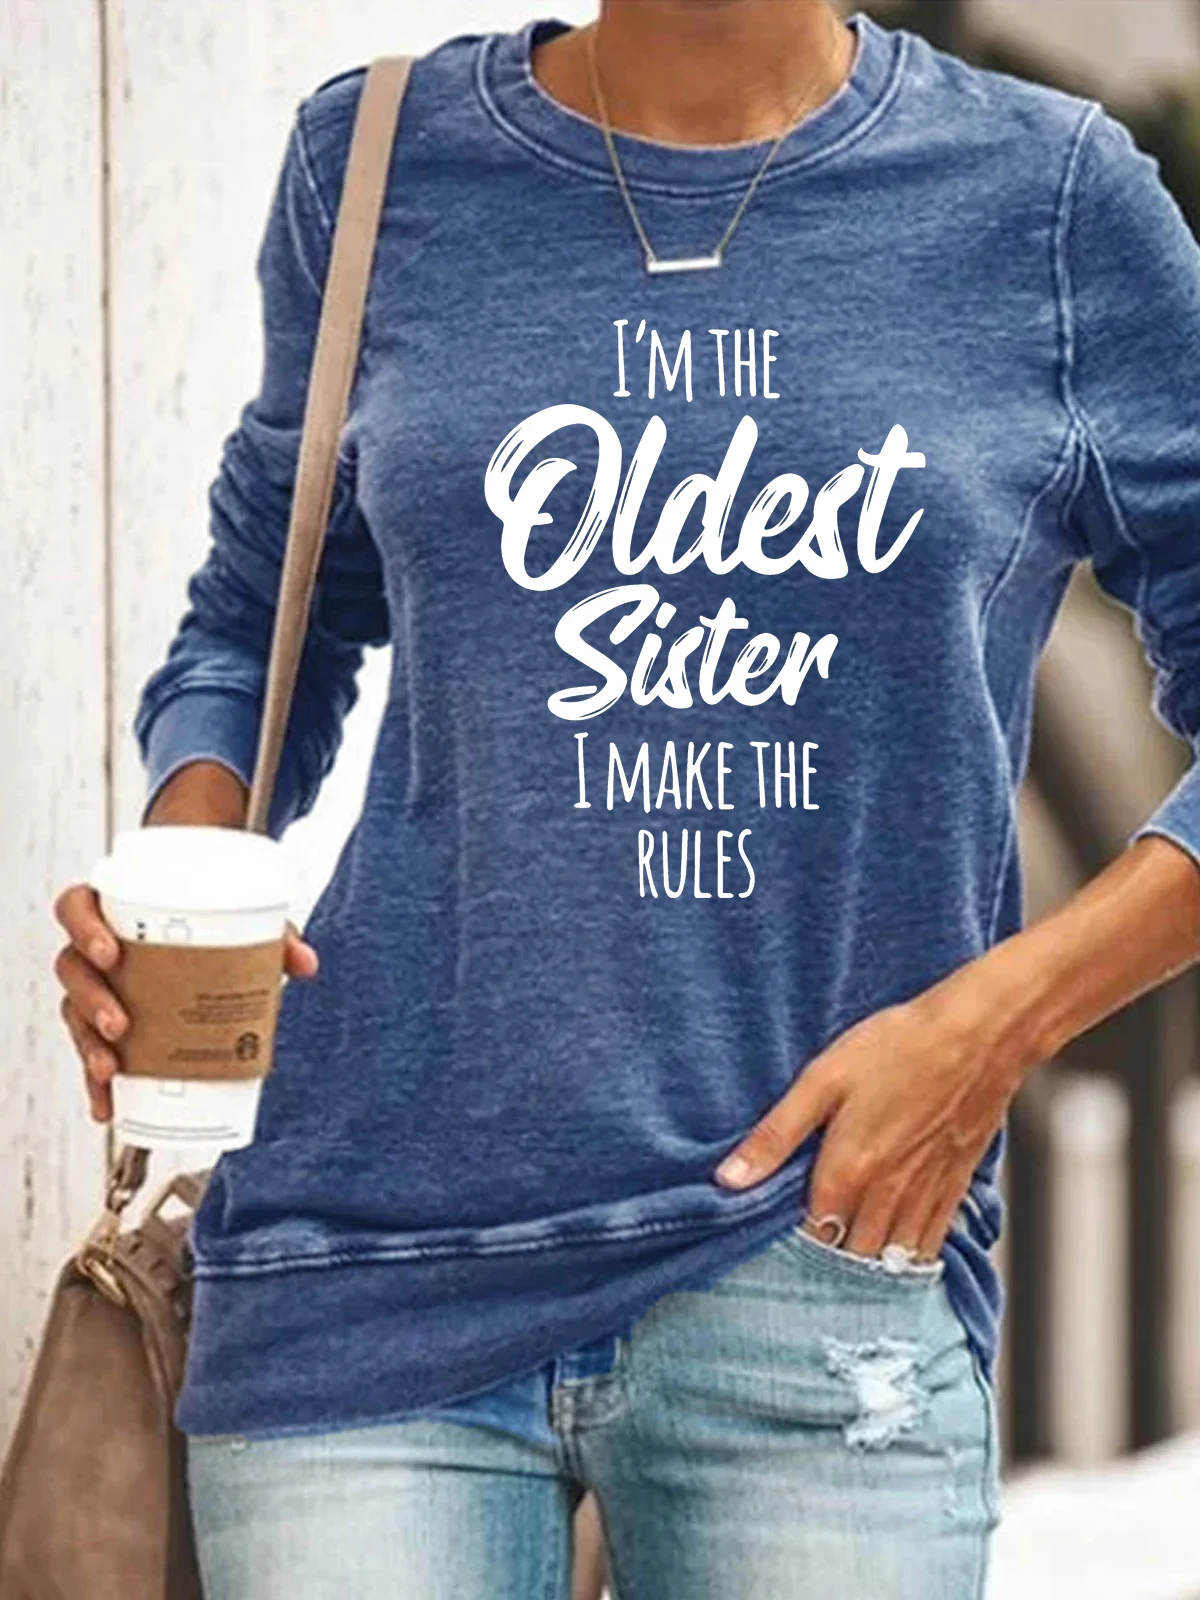 

I'm The Oldest Sister Makes Rule Women Graphic Hoodies Female Vacation Letter Street Style Sweatshirts Gift for Family